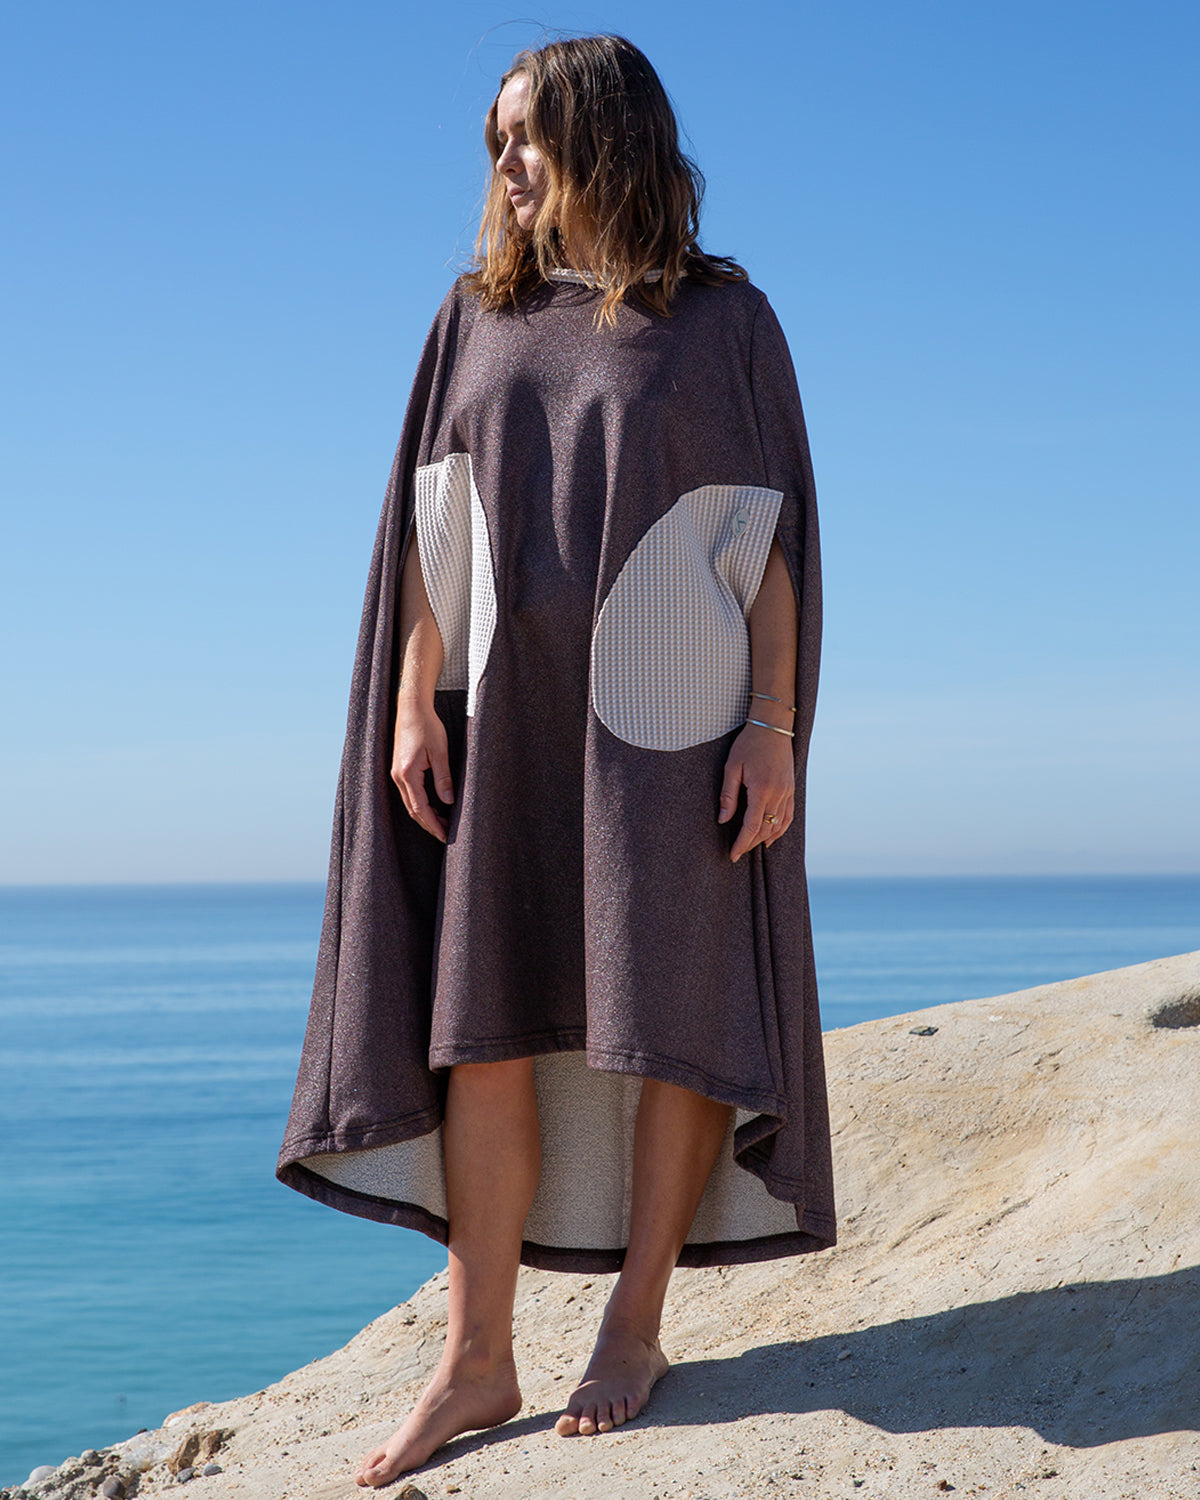 brown Changing cape shoreline seea beachwear clothing surf clothes